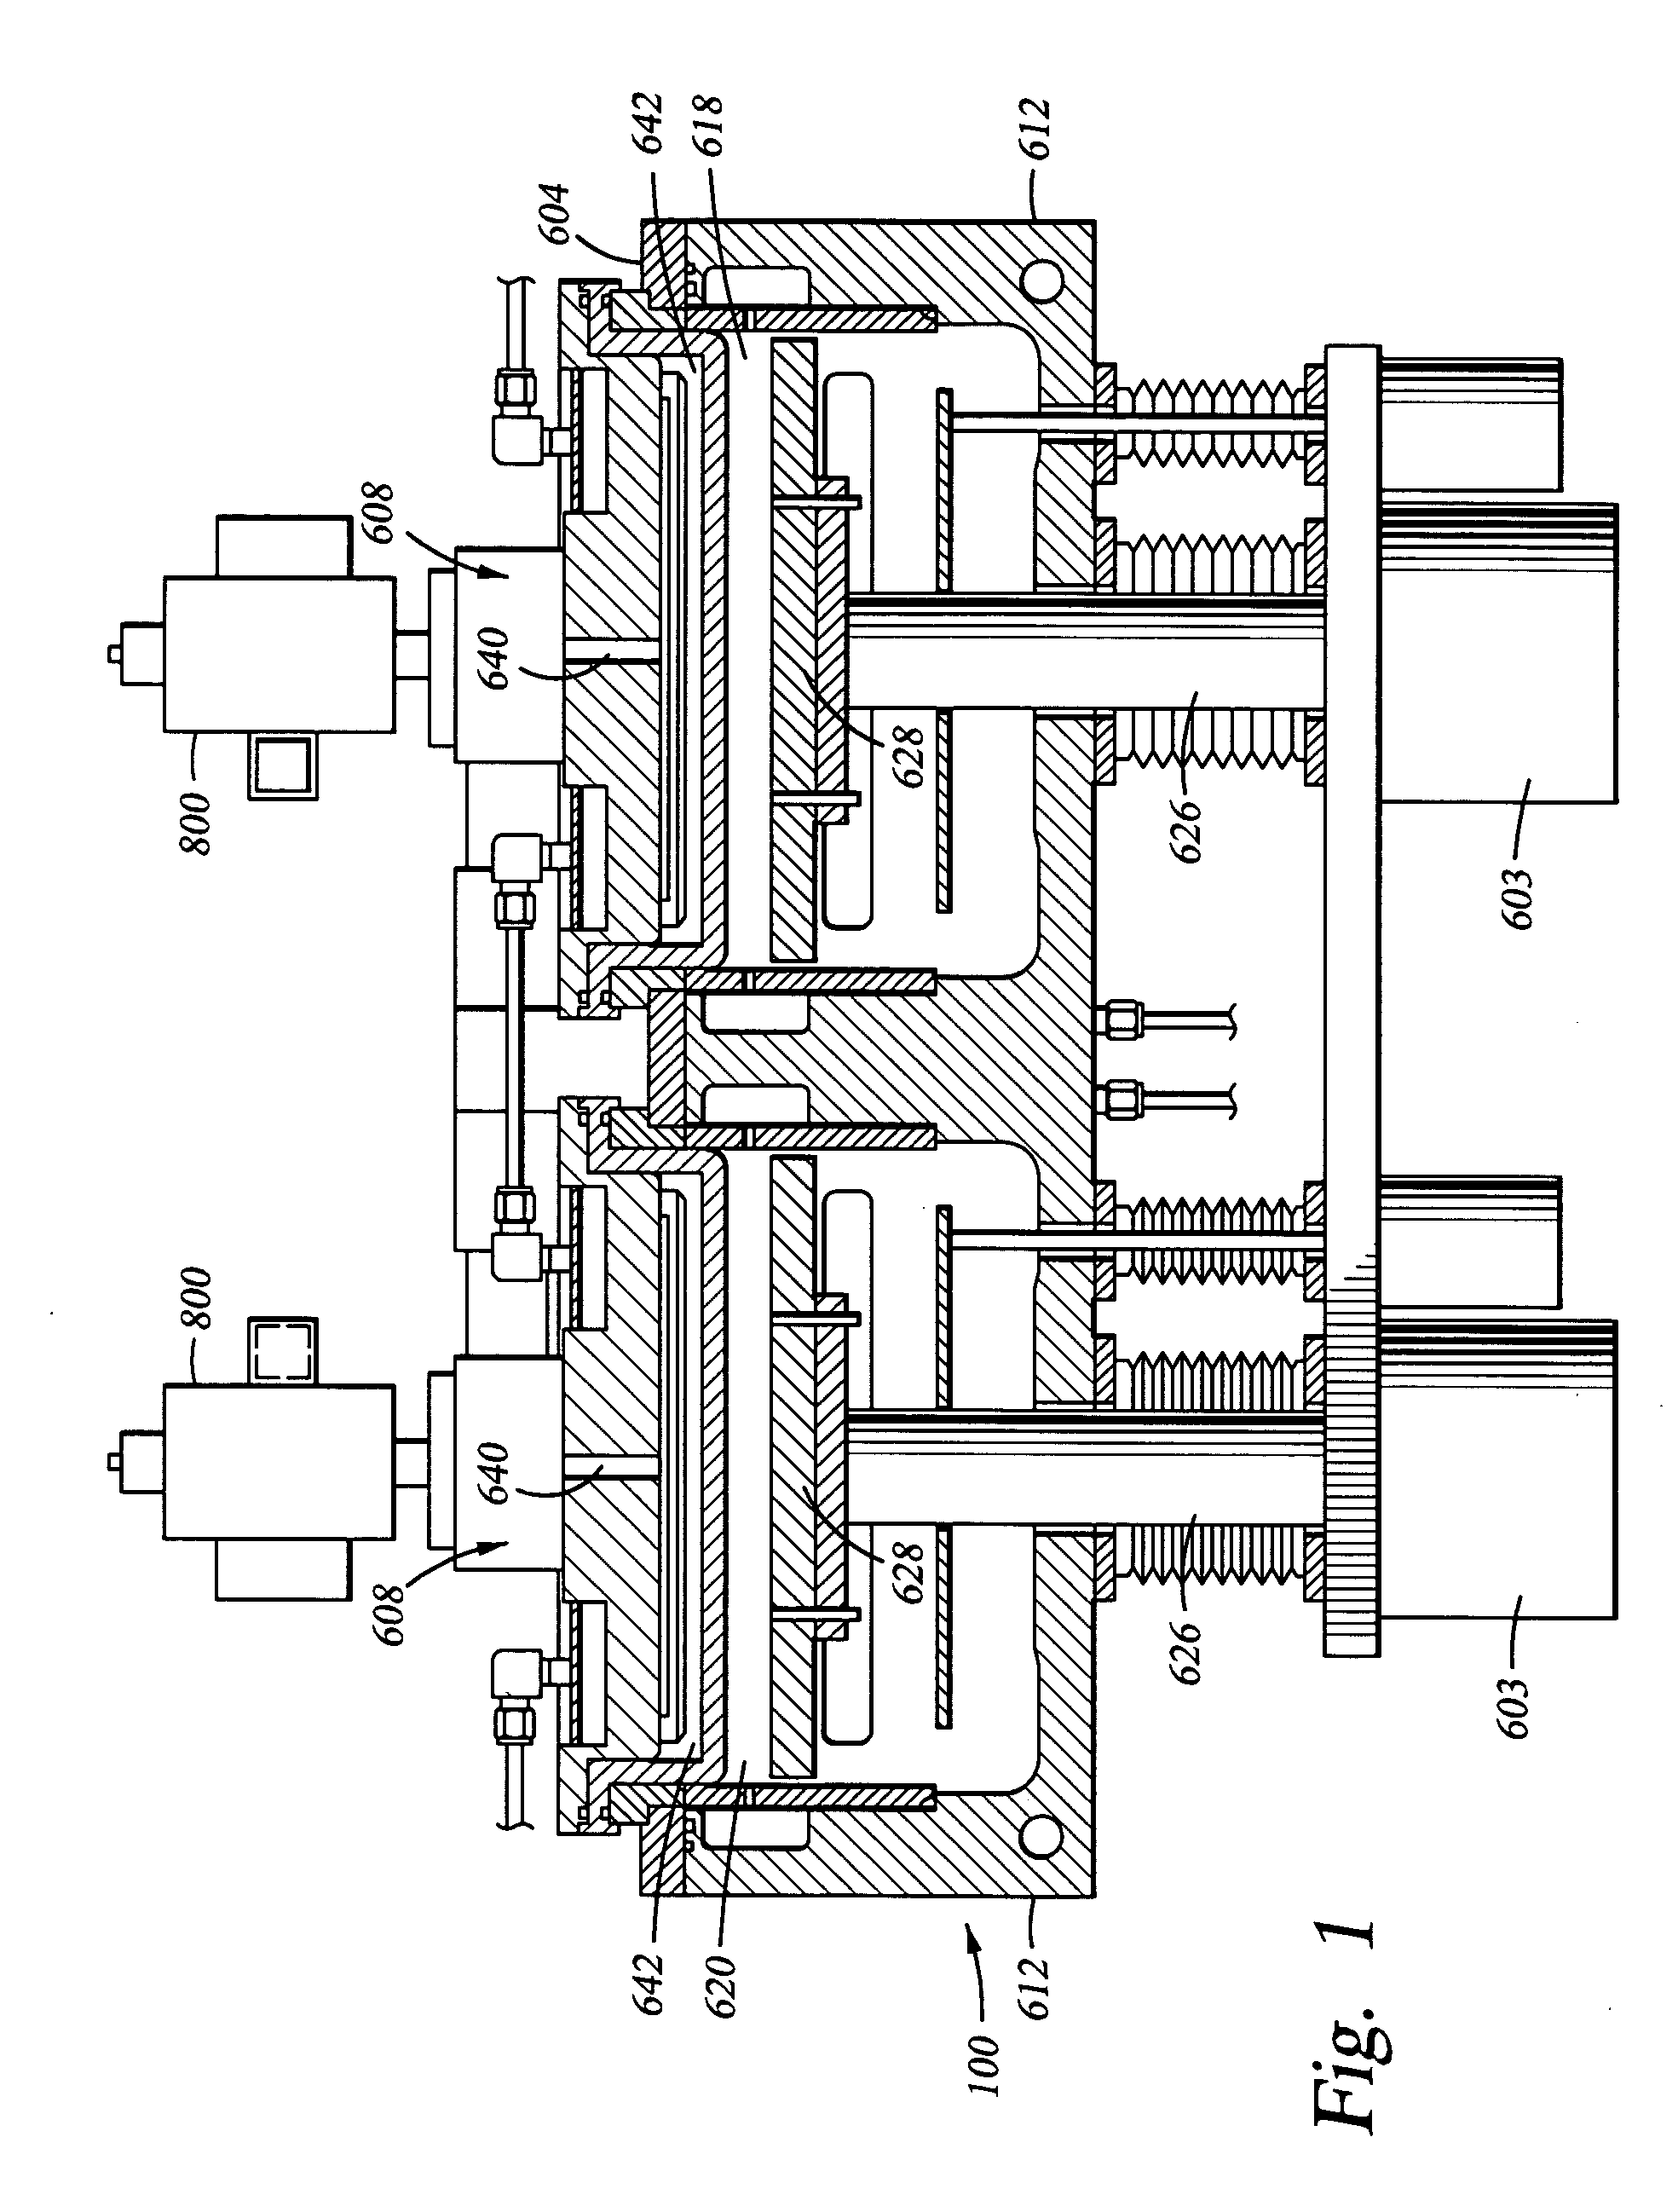 Method for cleaning a process chamber